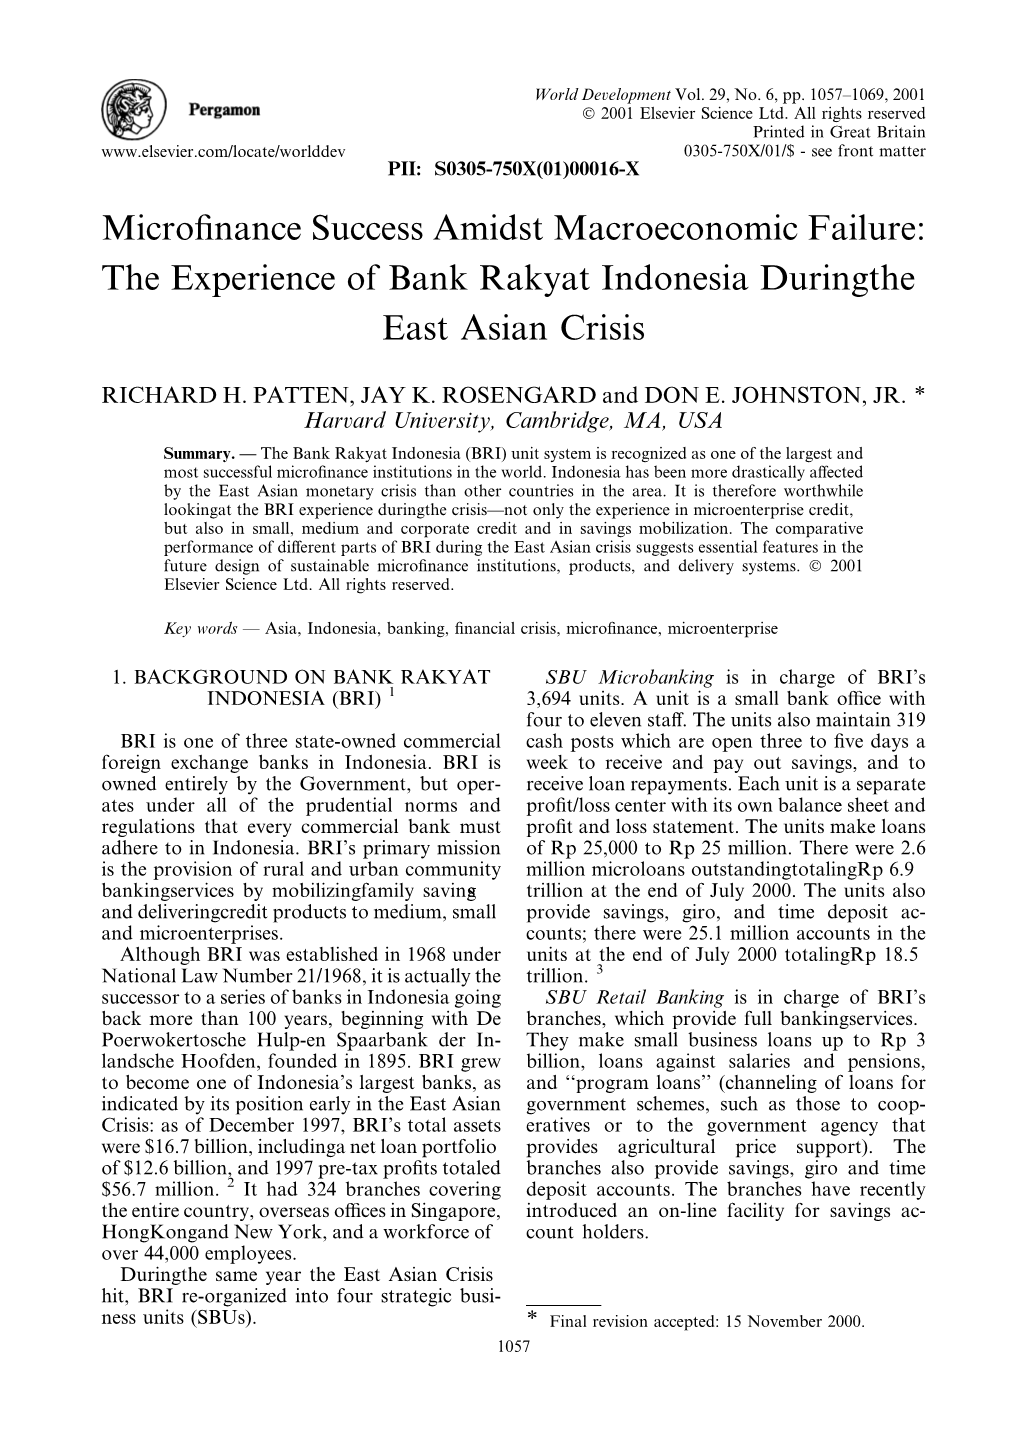 Microfinance Success Amidst Macroeconomic Failure: the Experience of Bank Rakyat Indonesia During the East Asian Crisis